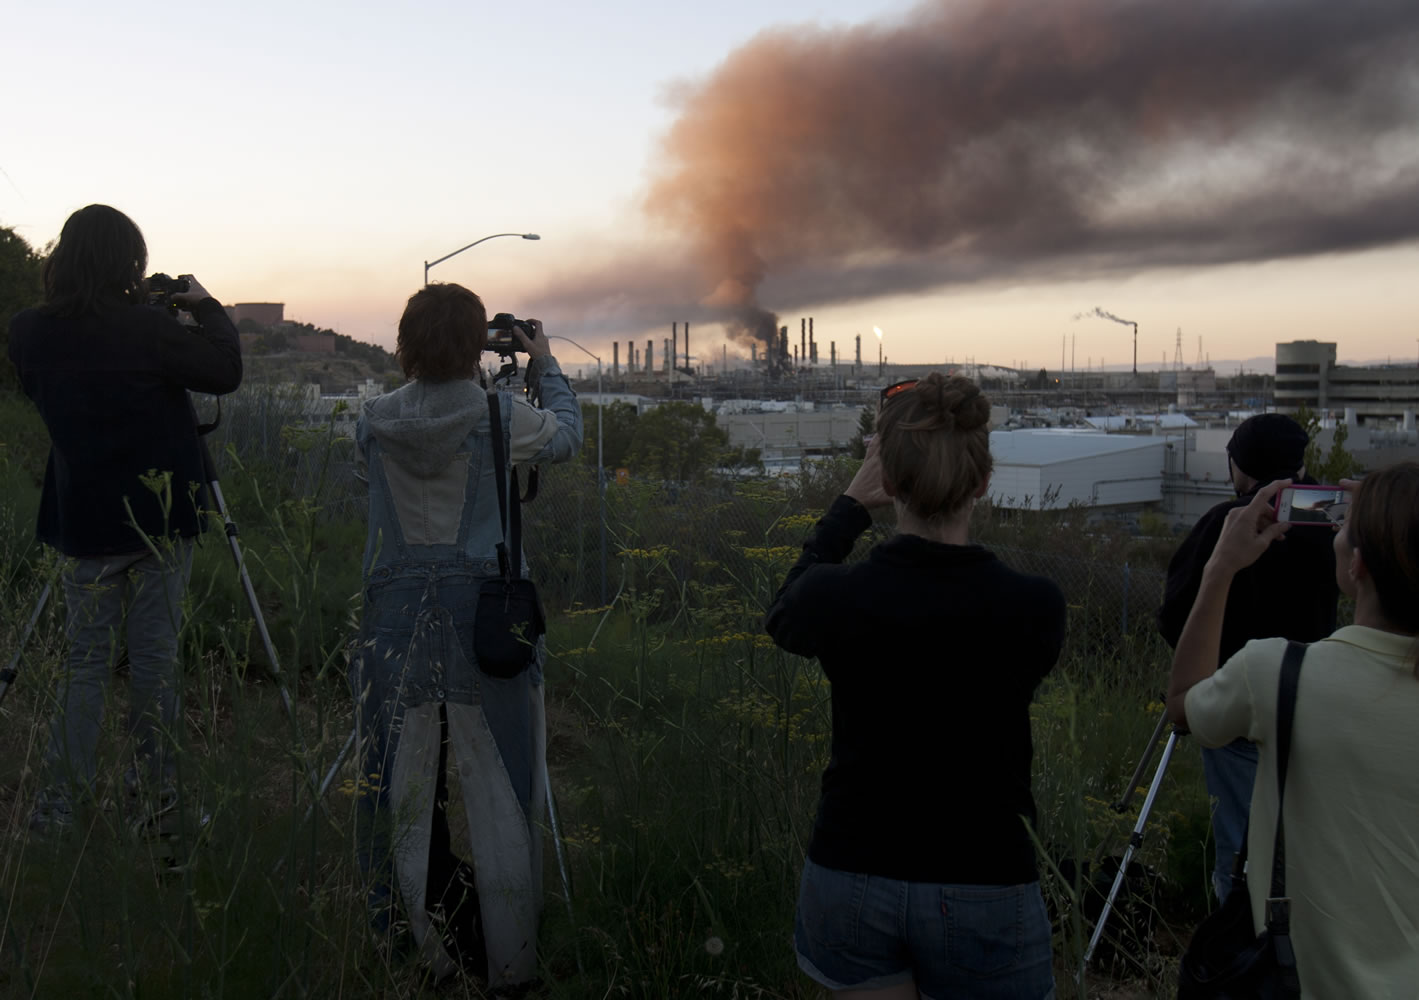 The curious gather on a hillside in Point Richmond, Calif.,  to photograph the the fire in an oil unit at the Chevron refinery in Richmond, Calif., Aug.